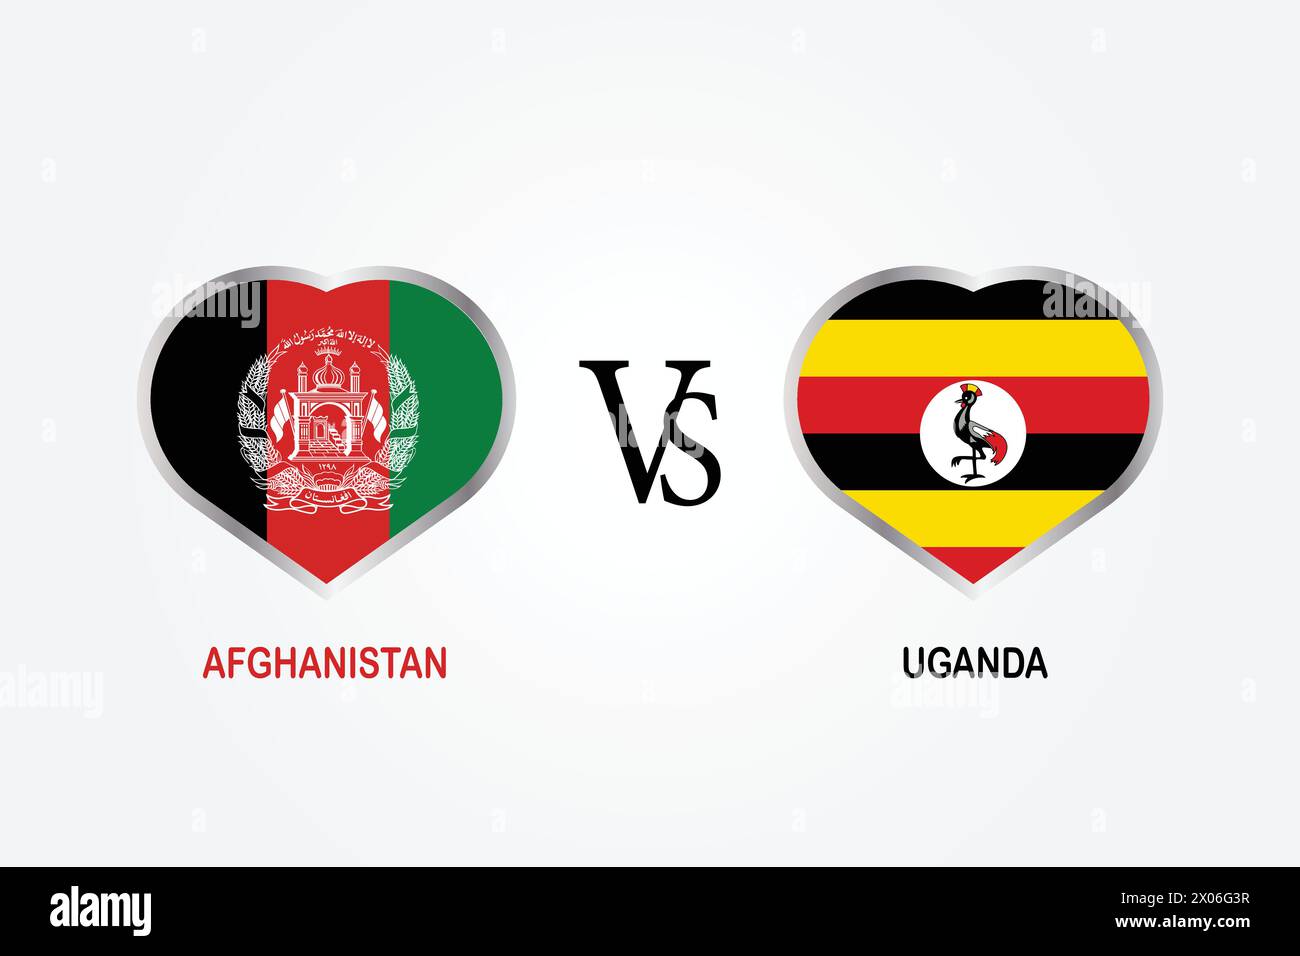 Afghanistan VS Uganda, Cricket Match concept with creative illustration of participant countries flag Batsman and Hearts isolated on white background. Stock Vector